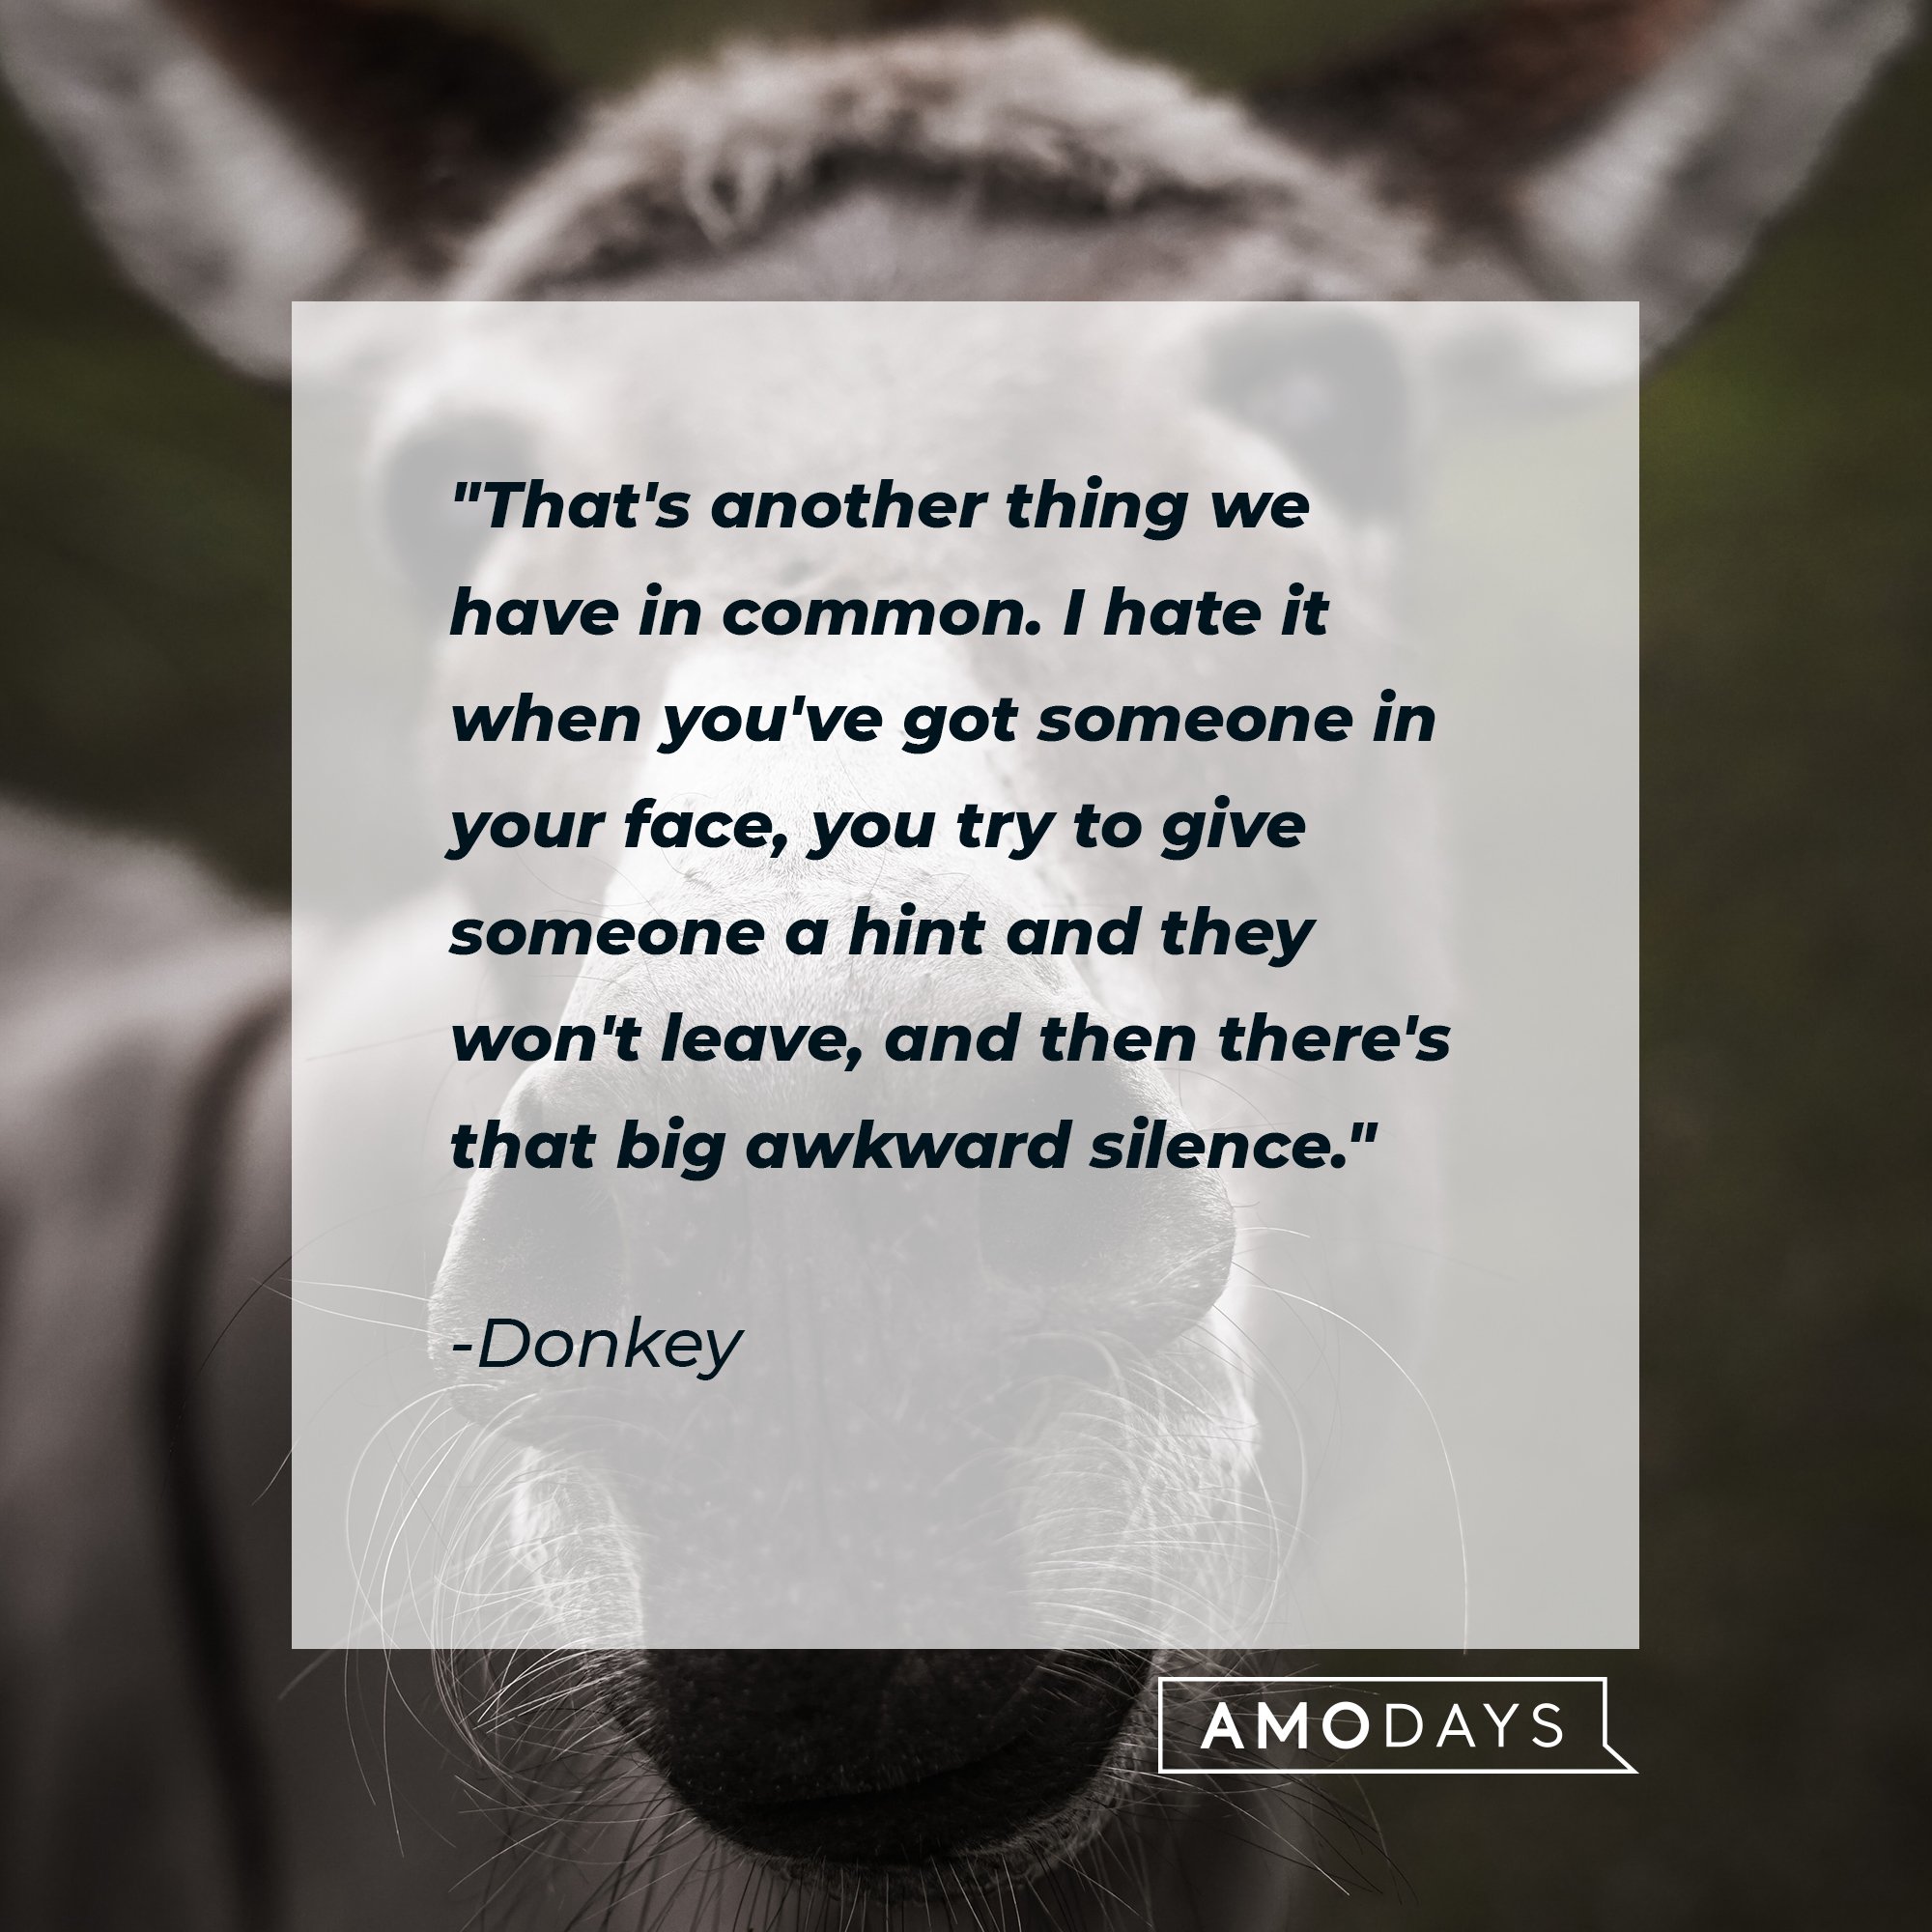 Donkey's quote: "That's another thing we have in common. I hate it when you've got someone in your face, you try to give someone a hint and they won't leave, and then there's that big awkward silence." | Image: AmoDays